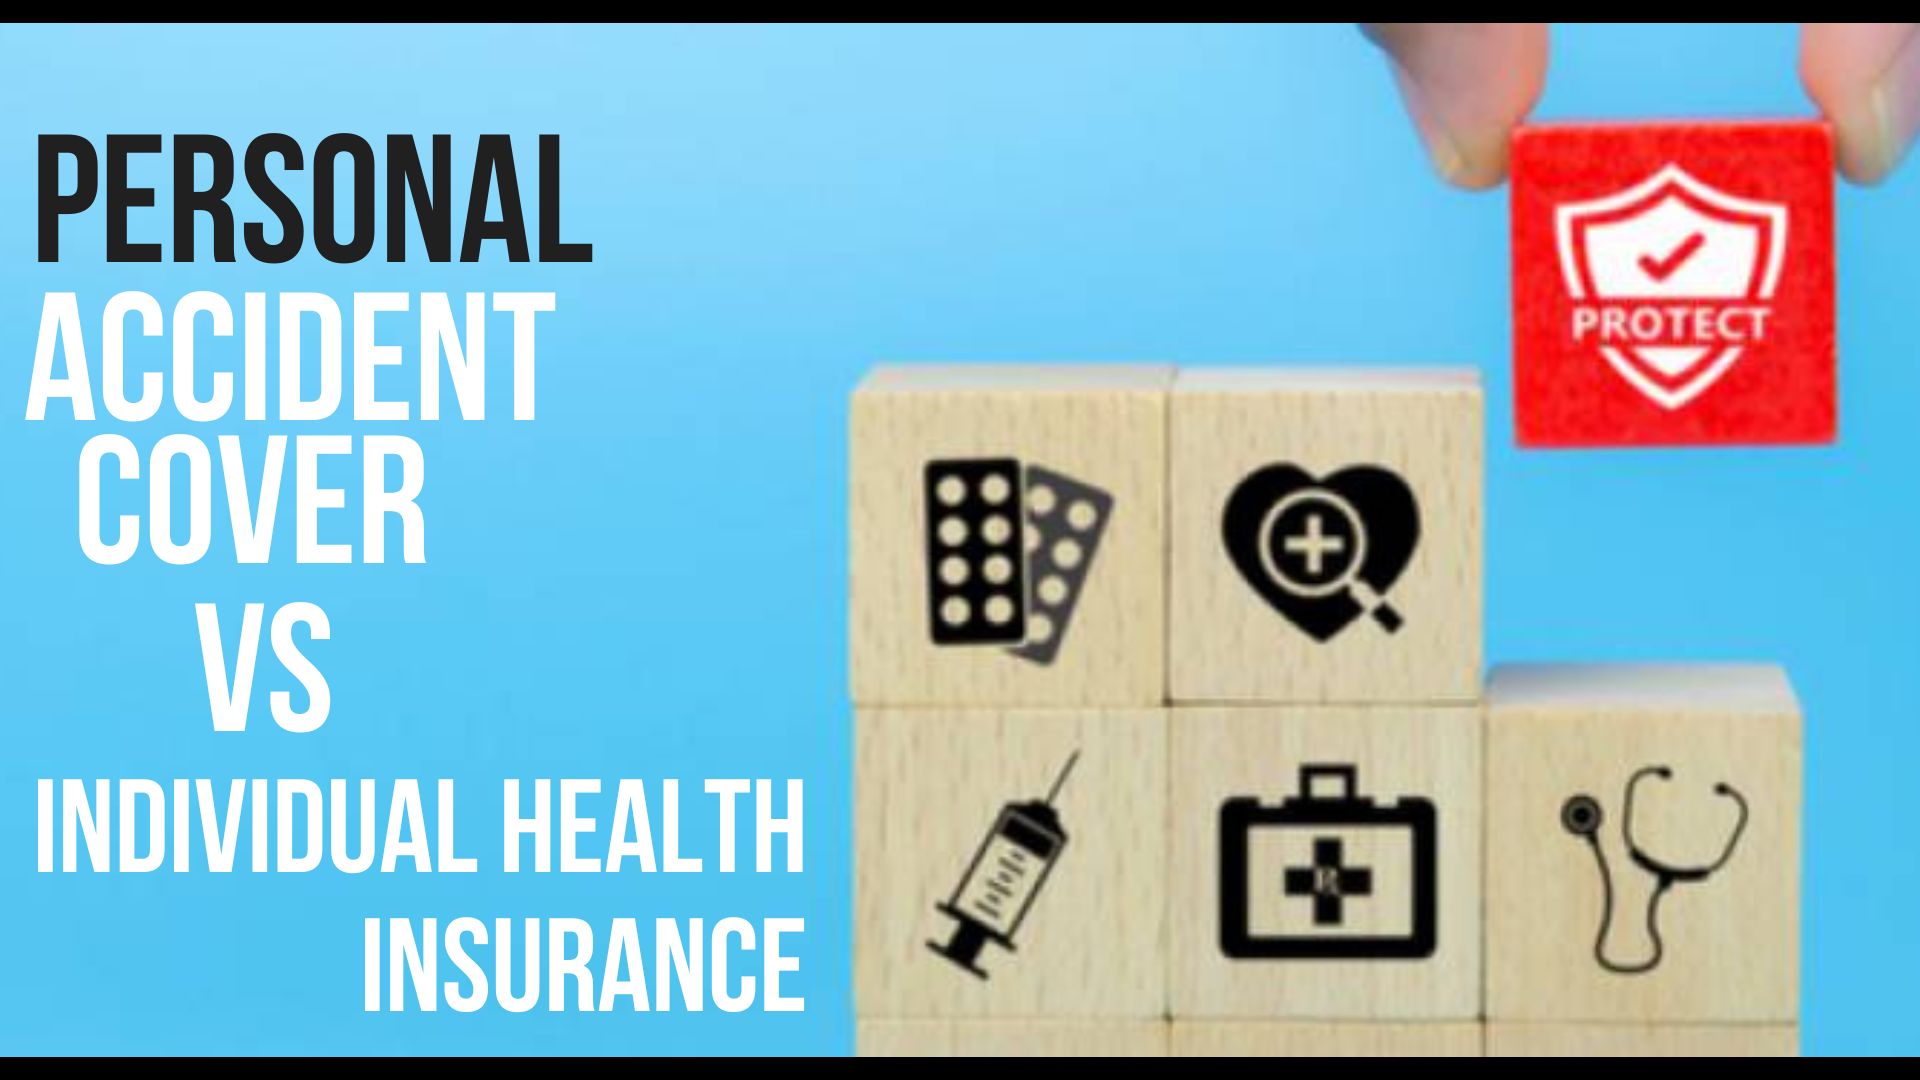 Personal Accident Cover Vs Individual Health Insurance